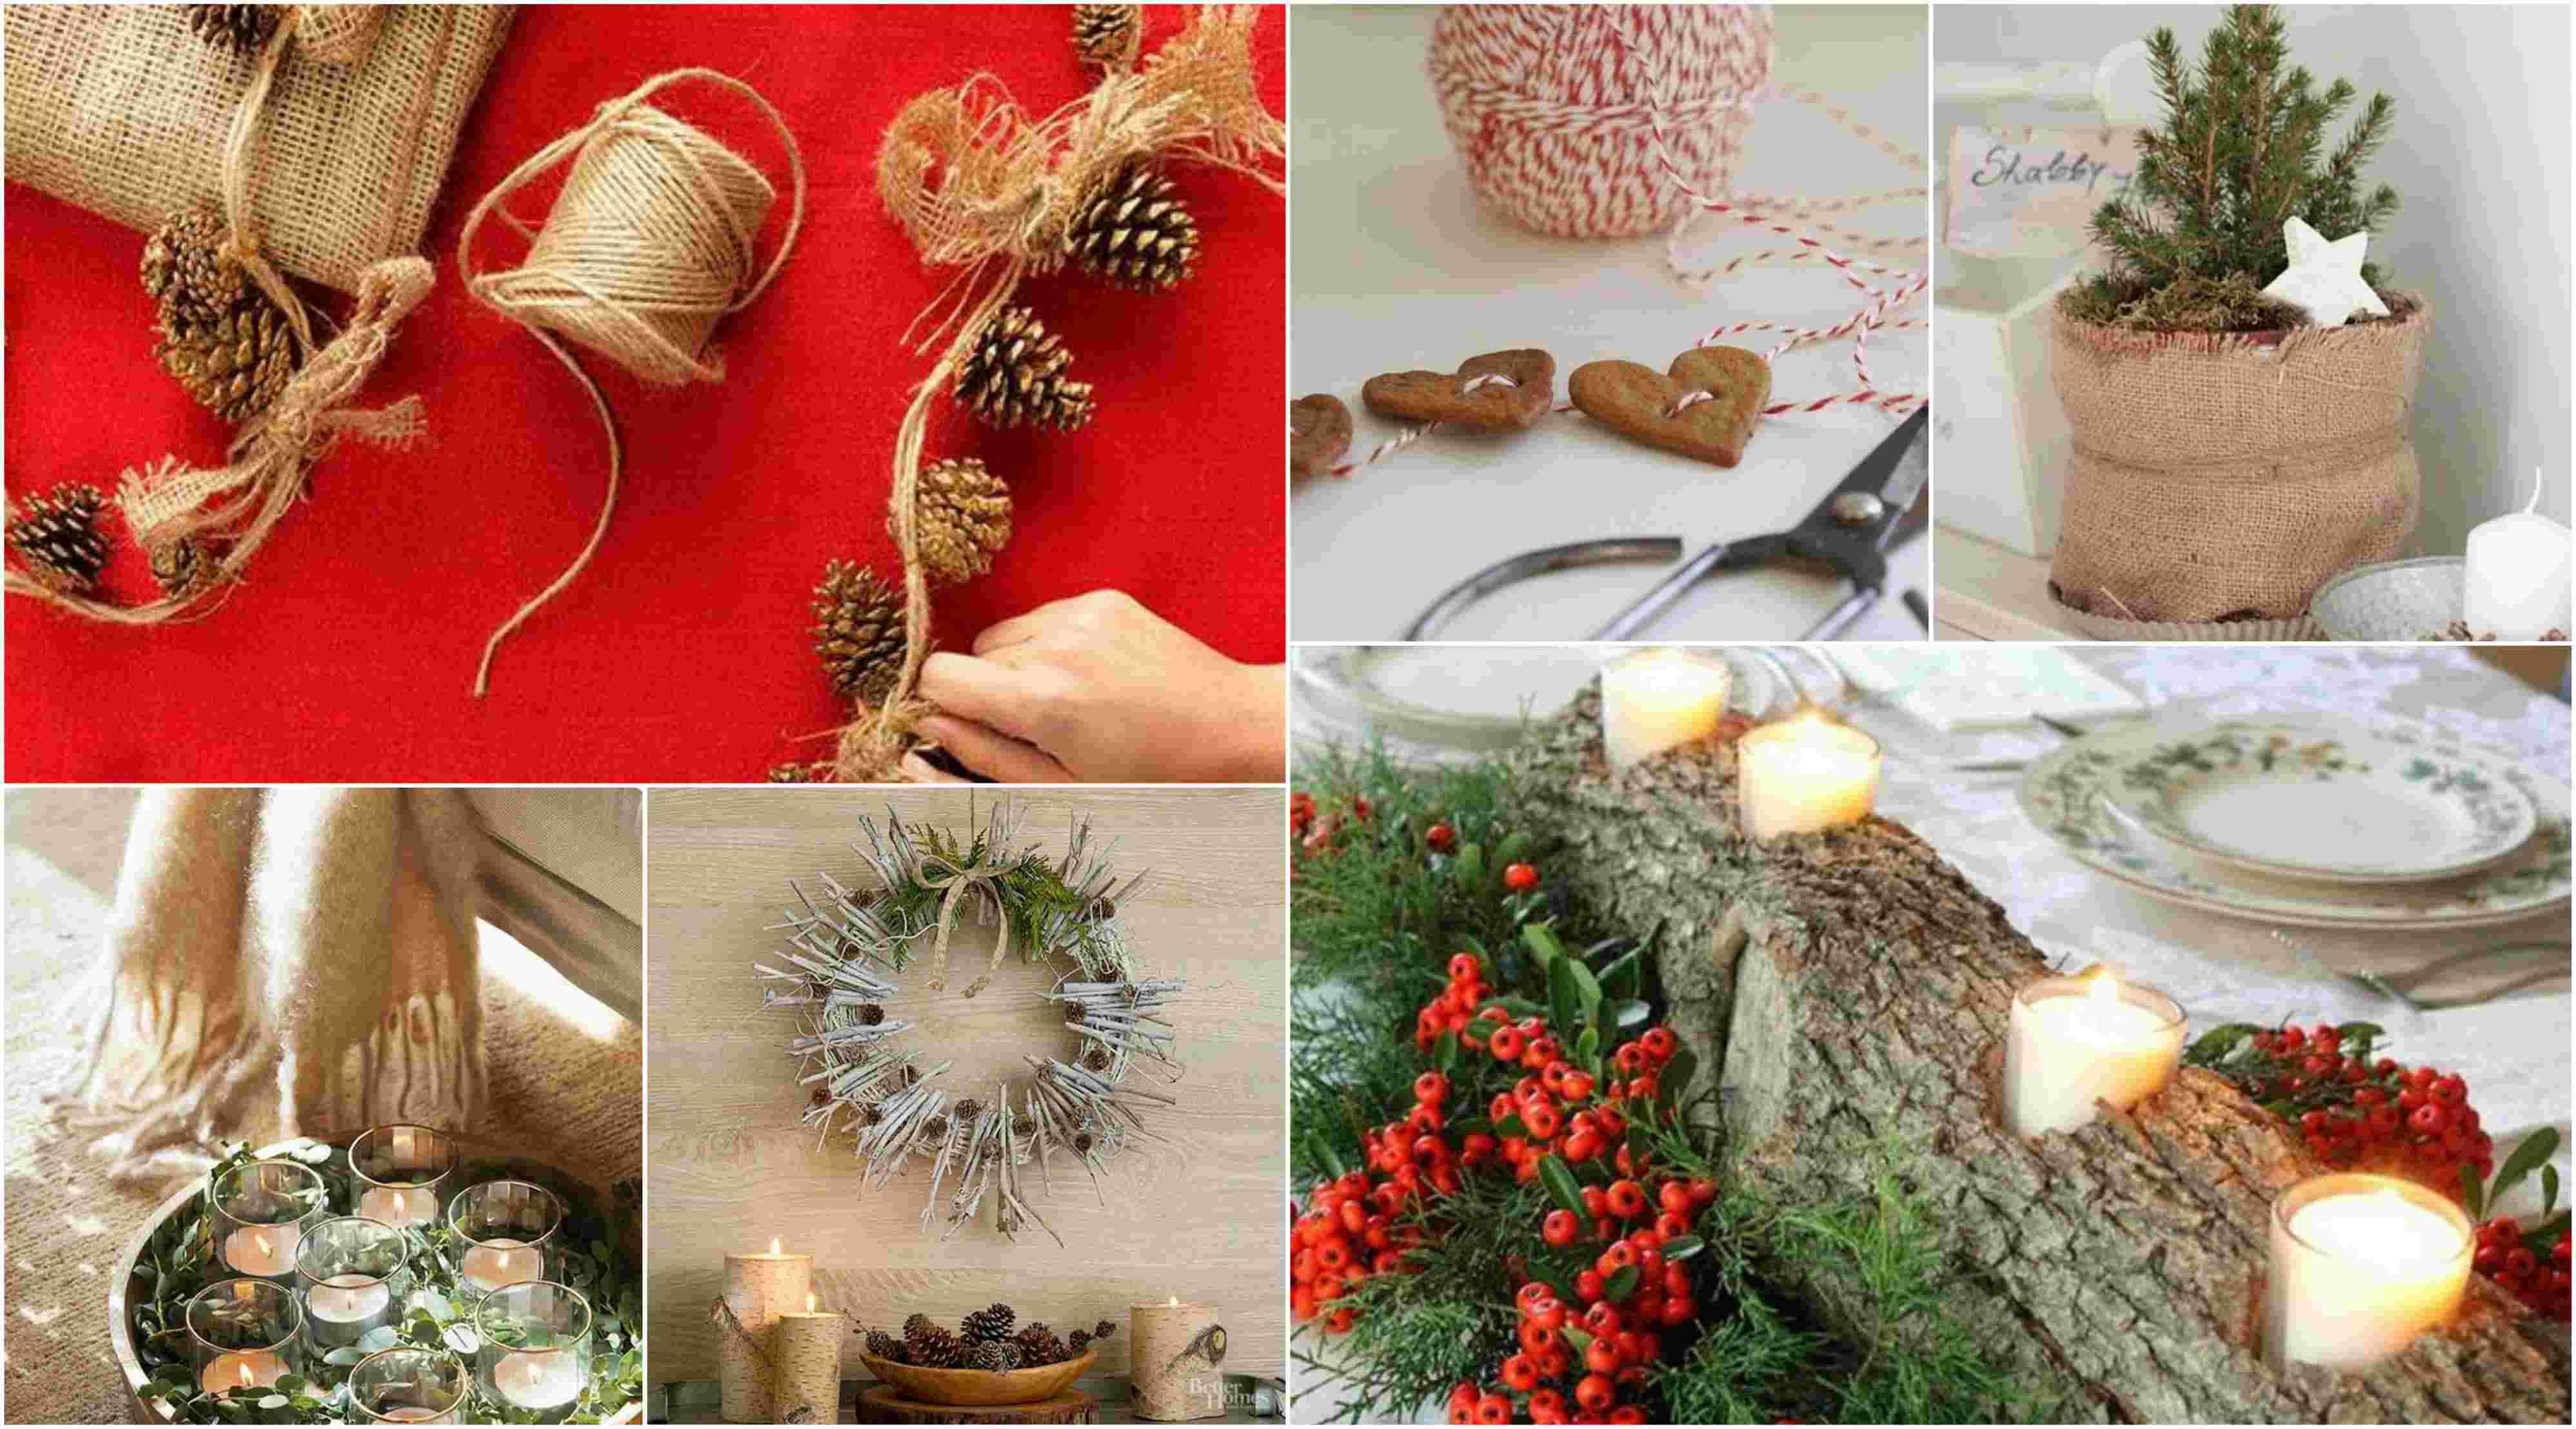  Christmas  Decorations  Natural  Materials www indiepedia org